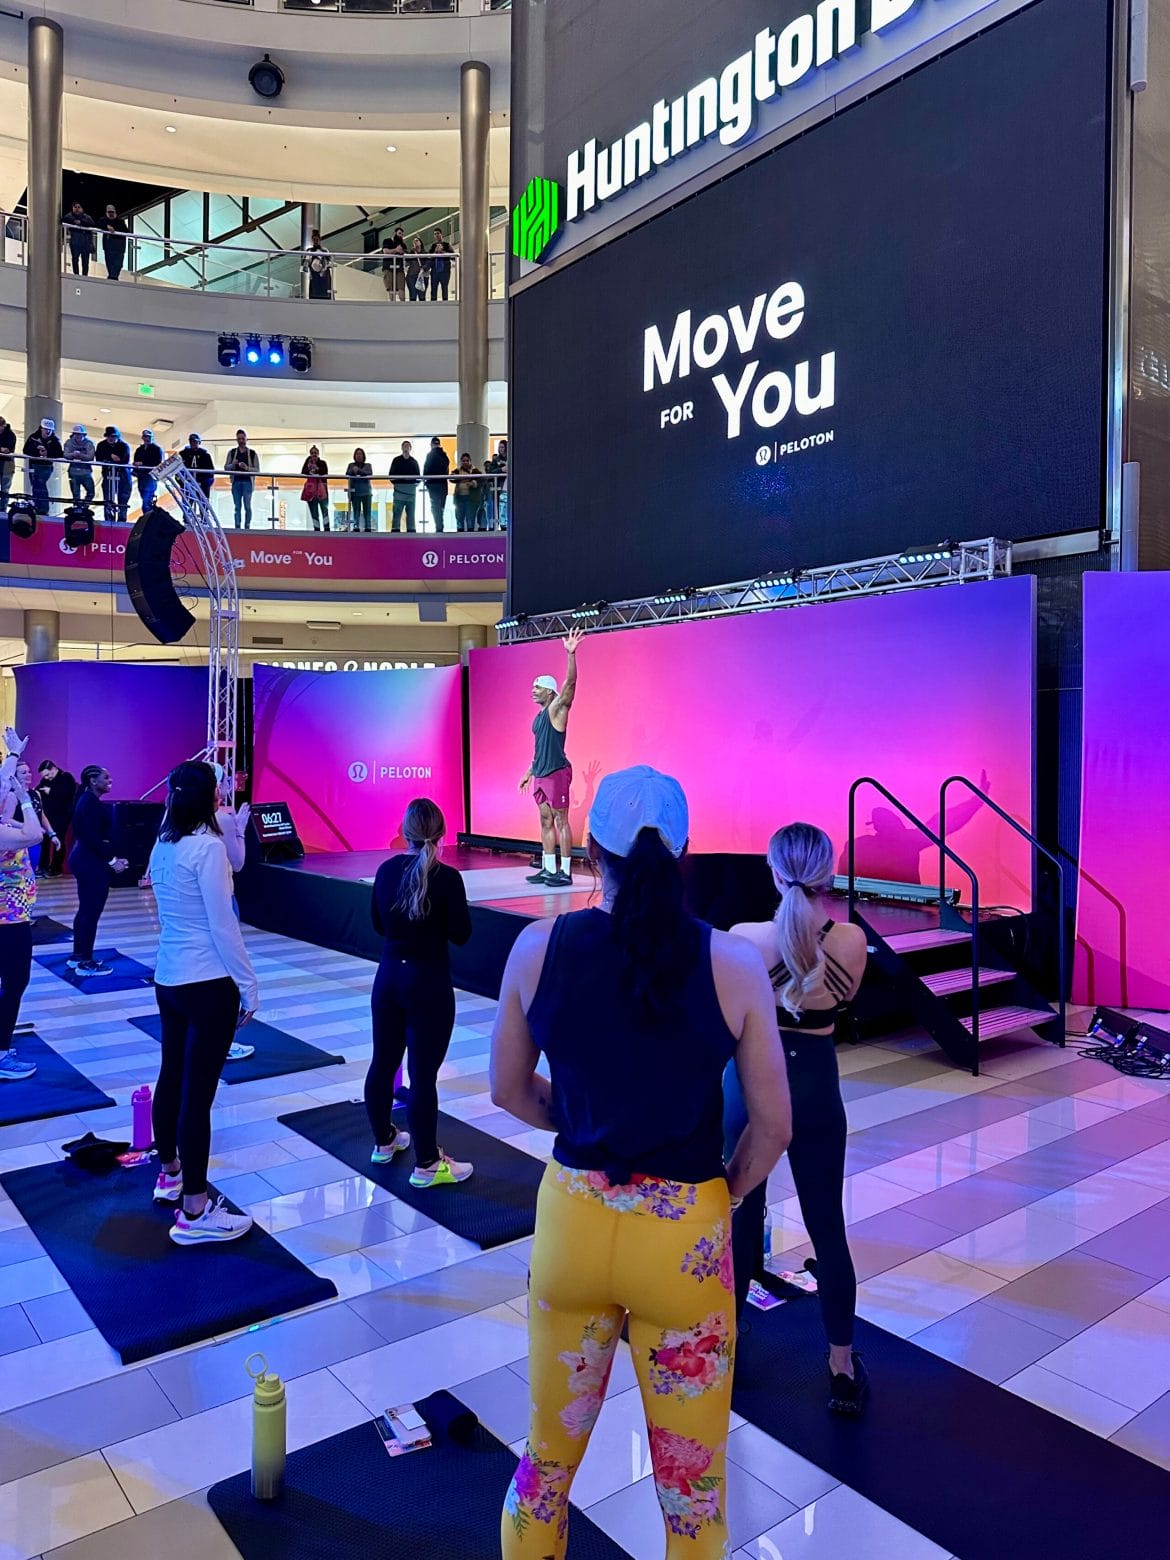 Adrian's Move for You Class at the Mall of America. Image credit @shantastic.life.